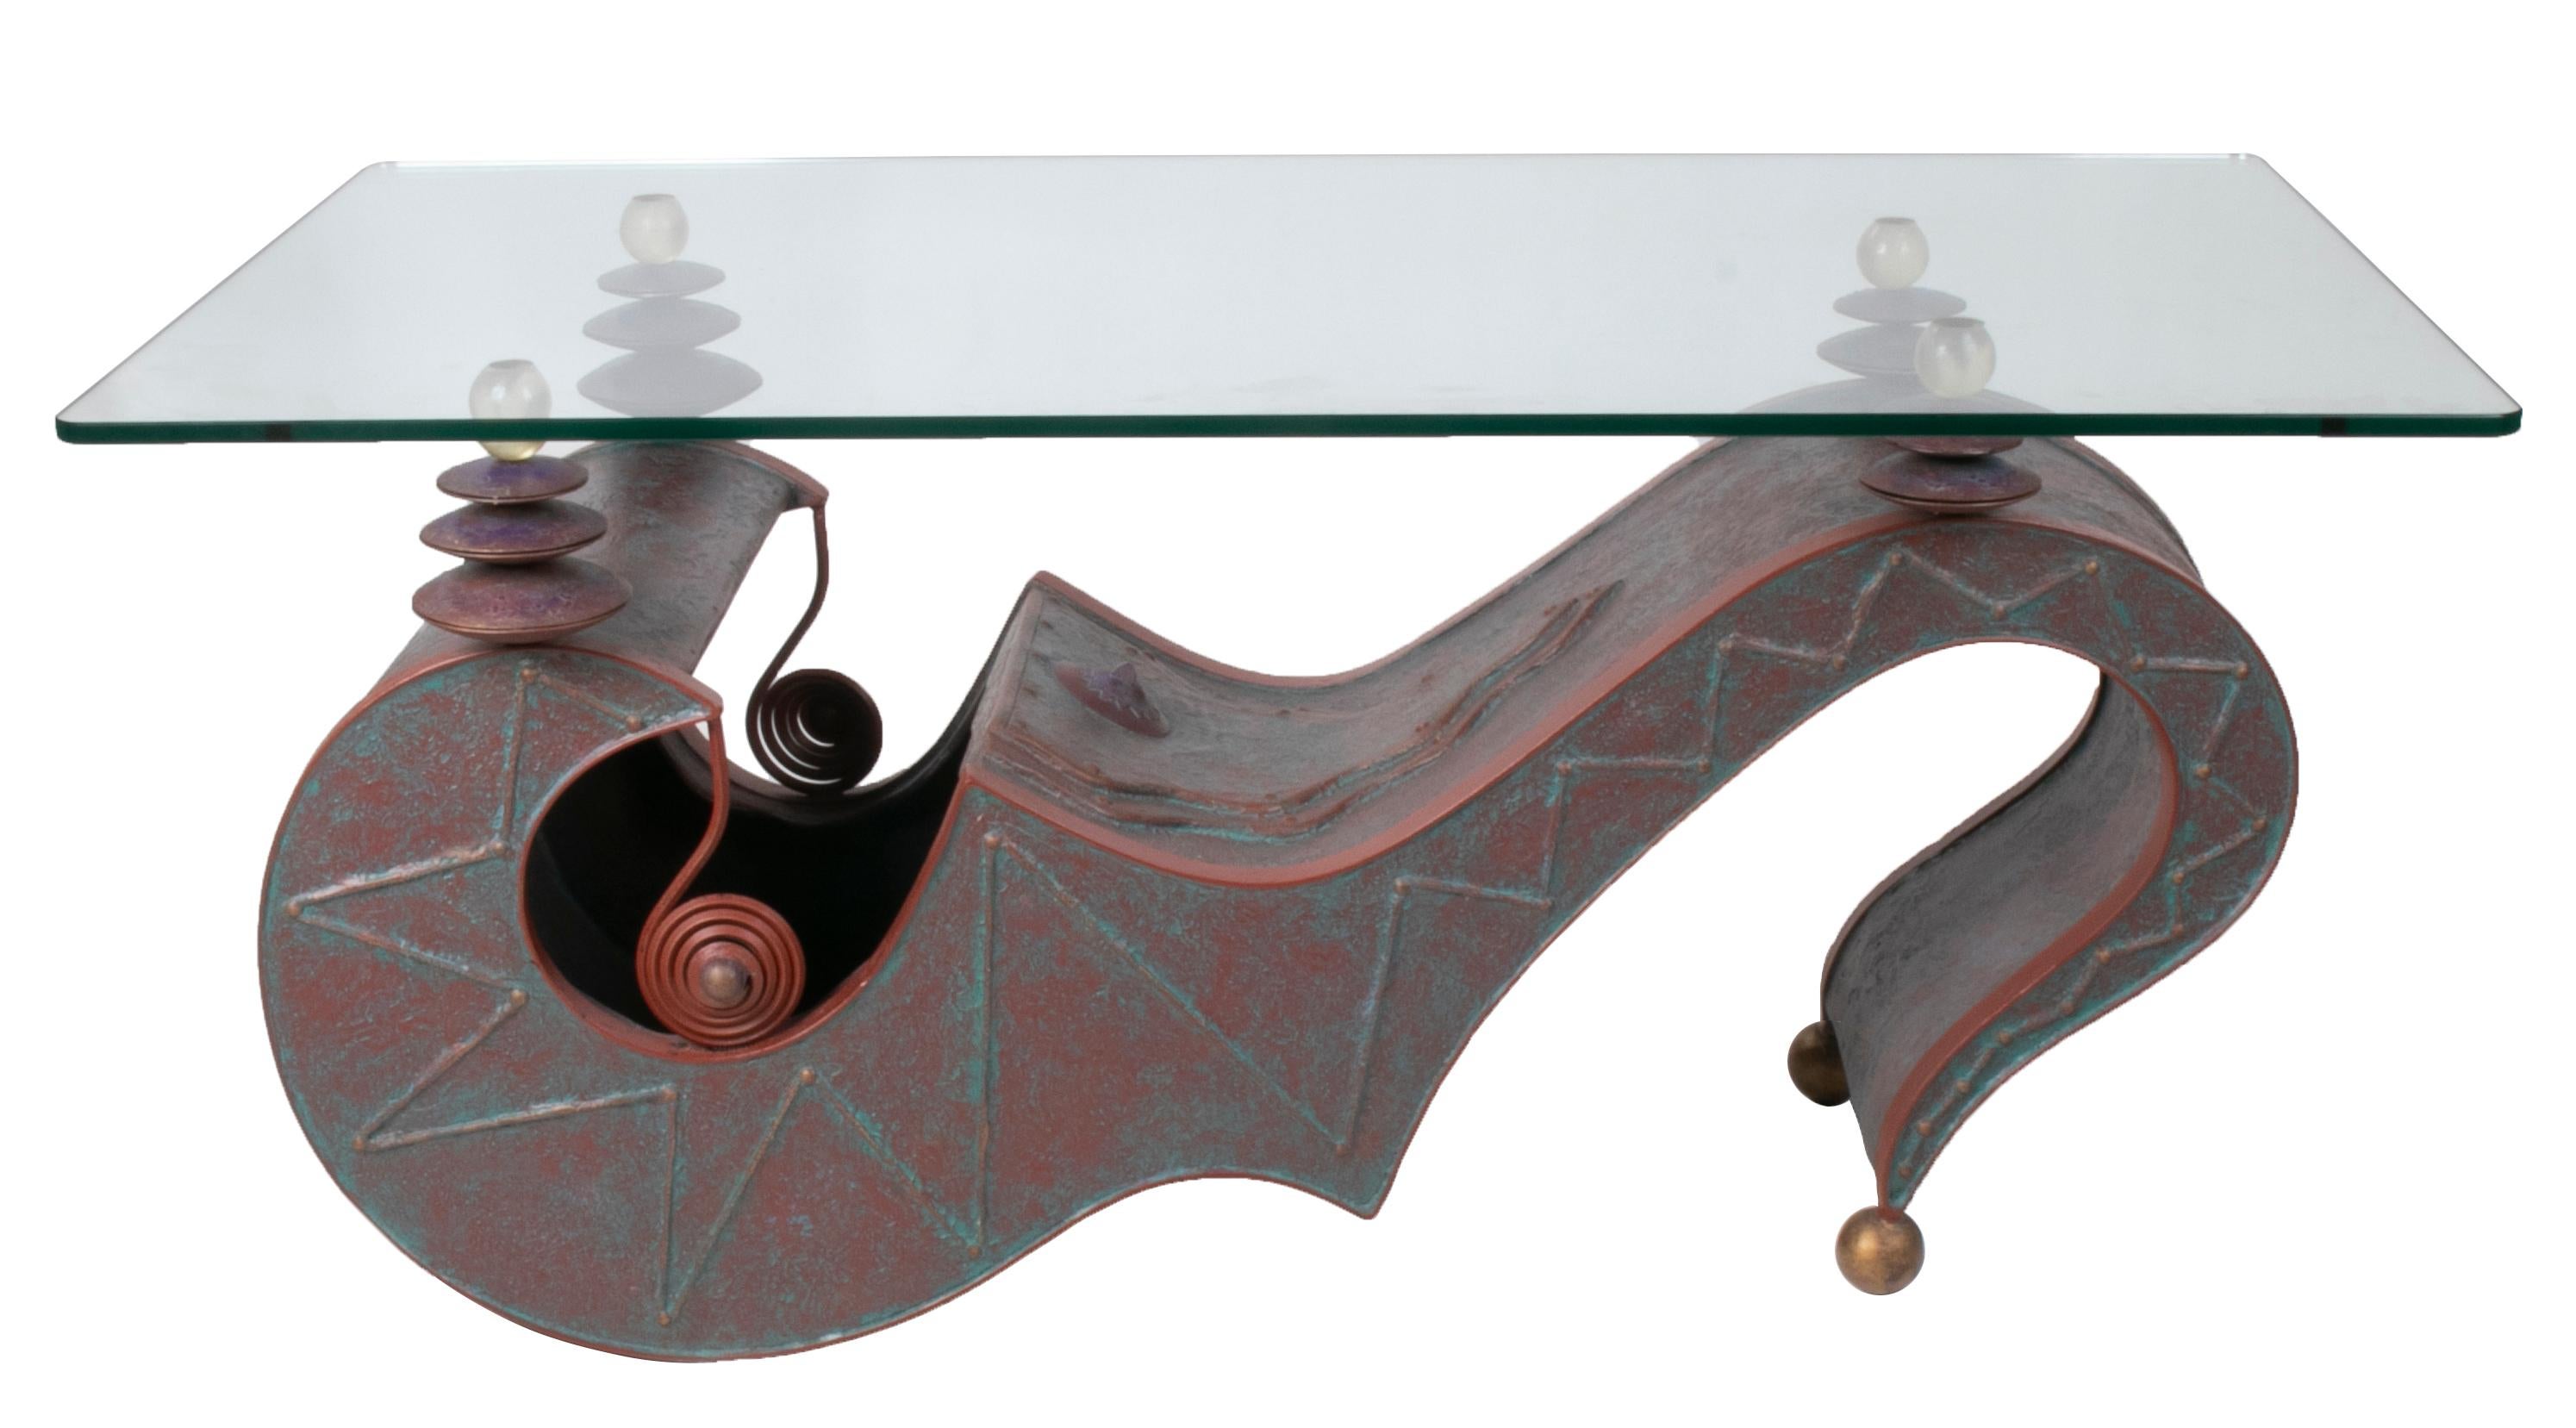 1980s German abstract design iron and glass coffee table.